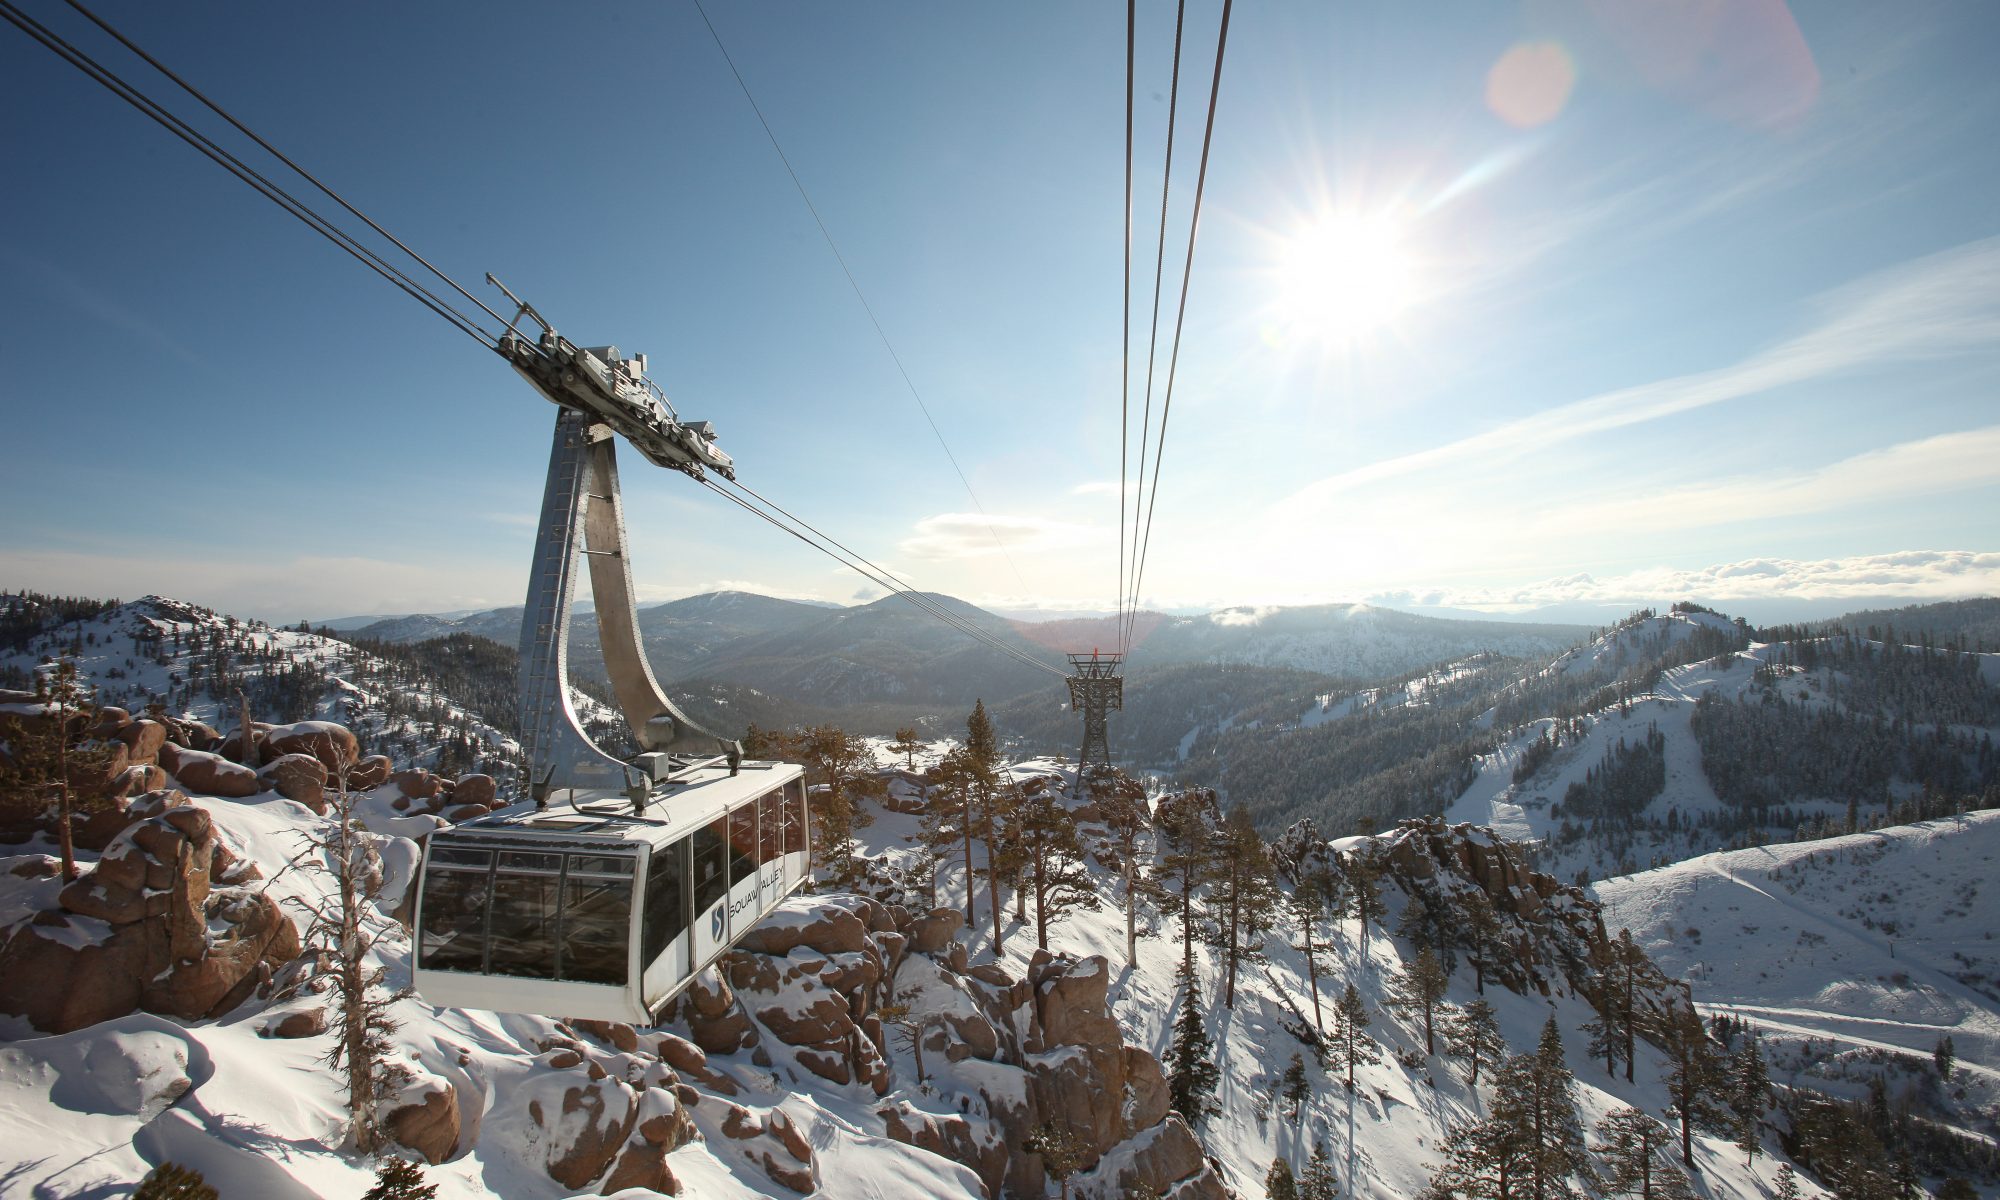 Scenics at Squaw Valley Mountain Resort in Olympic Valley, California.Alterra Mountain Company Announces $181 Million in Capital Improvements for the 2019/2020 Winter Season.